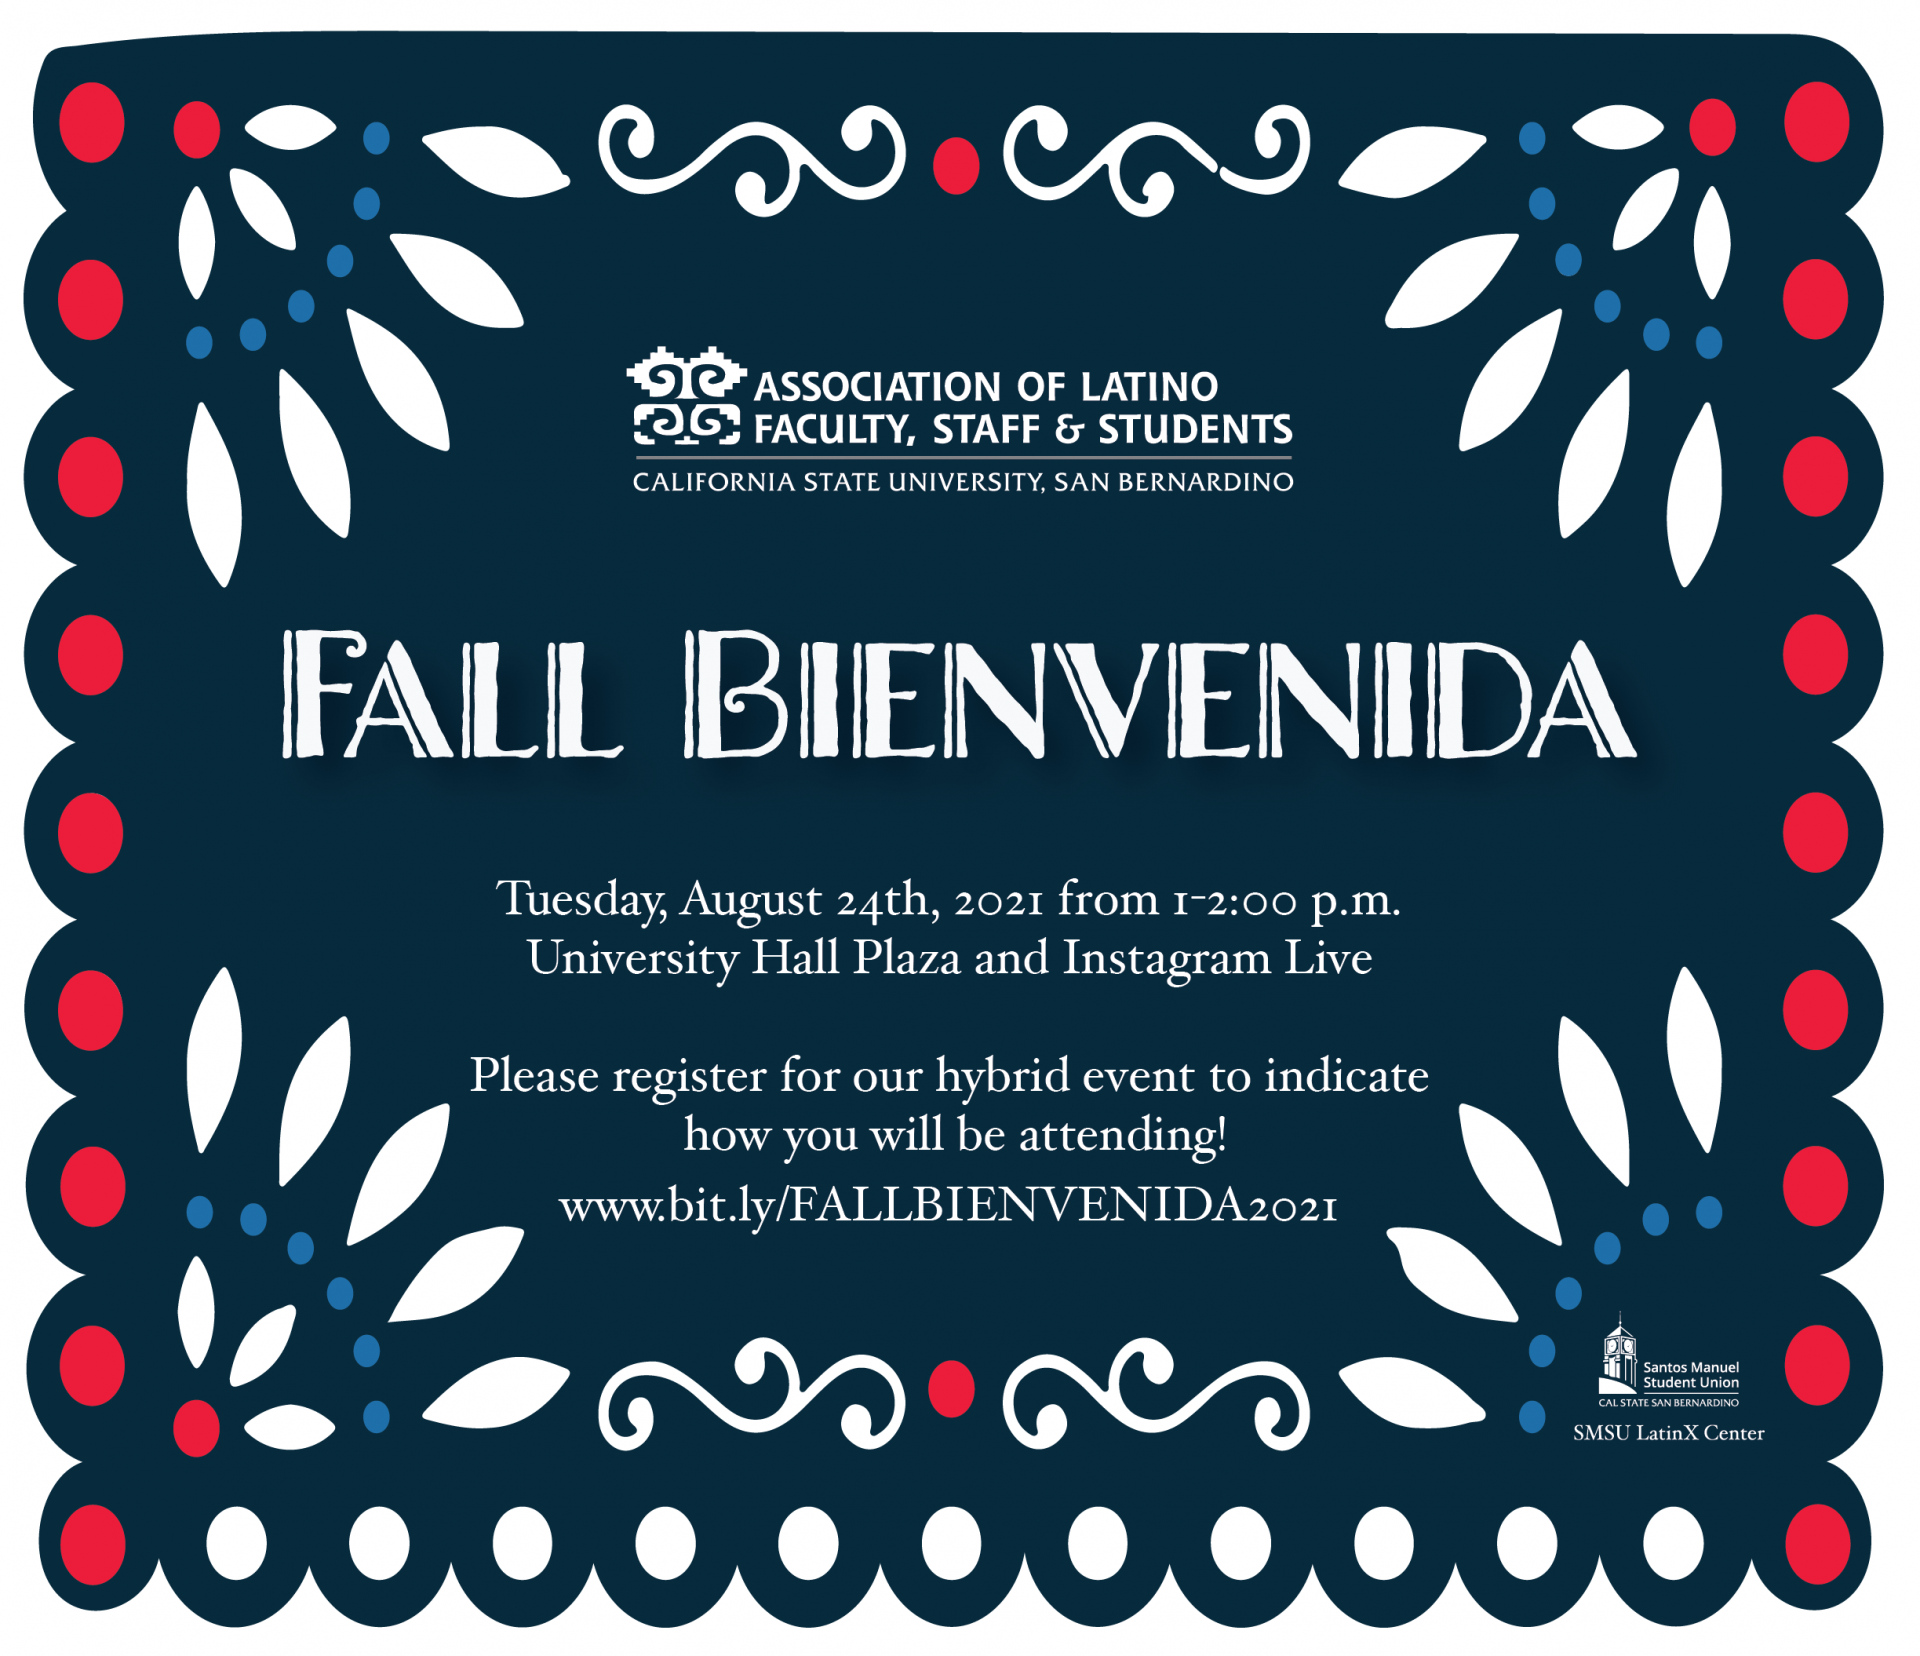 Association of Latino Faculty, Staff and Students Fall Bienvenida Tuesday, August 24th, 2021 from 1 - 2:00 pm. University Hall Plaza and Instagram Live. Please register for our hybrid event to indicate how you will be attending! www.bit.ly/FALLBIENVENIDA2021